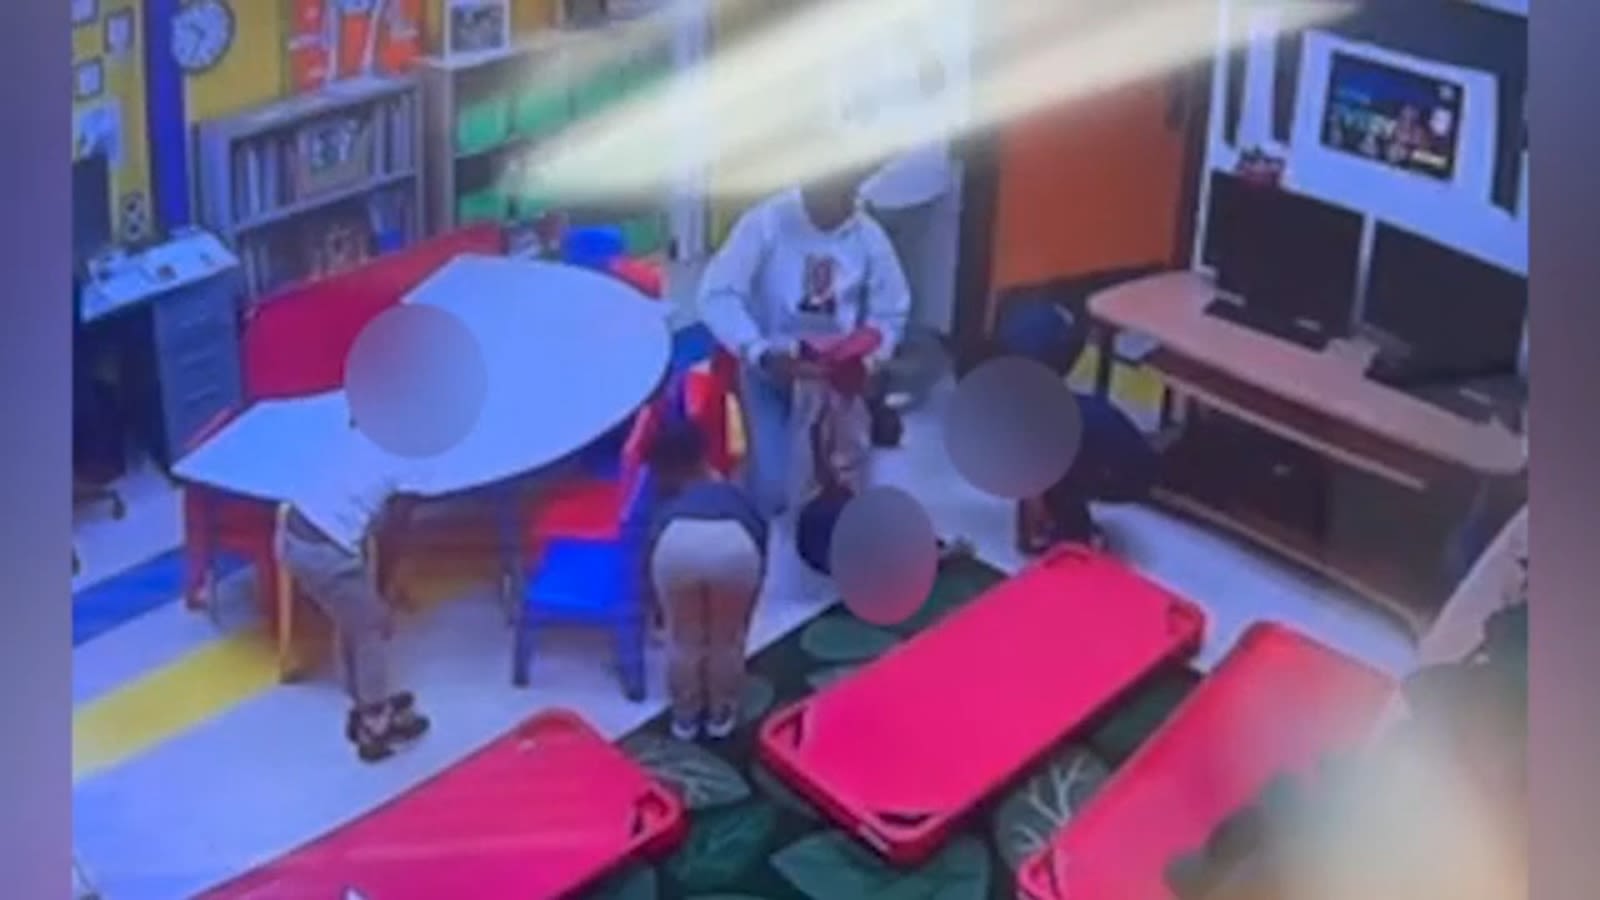 Video shows woman at LA preschool grabbing 4-year-old boy by ankles, carrying him upside down